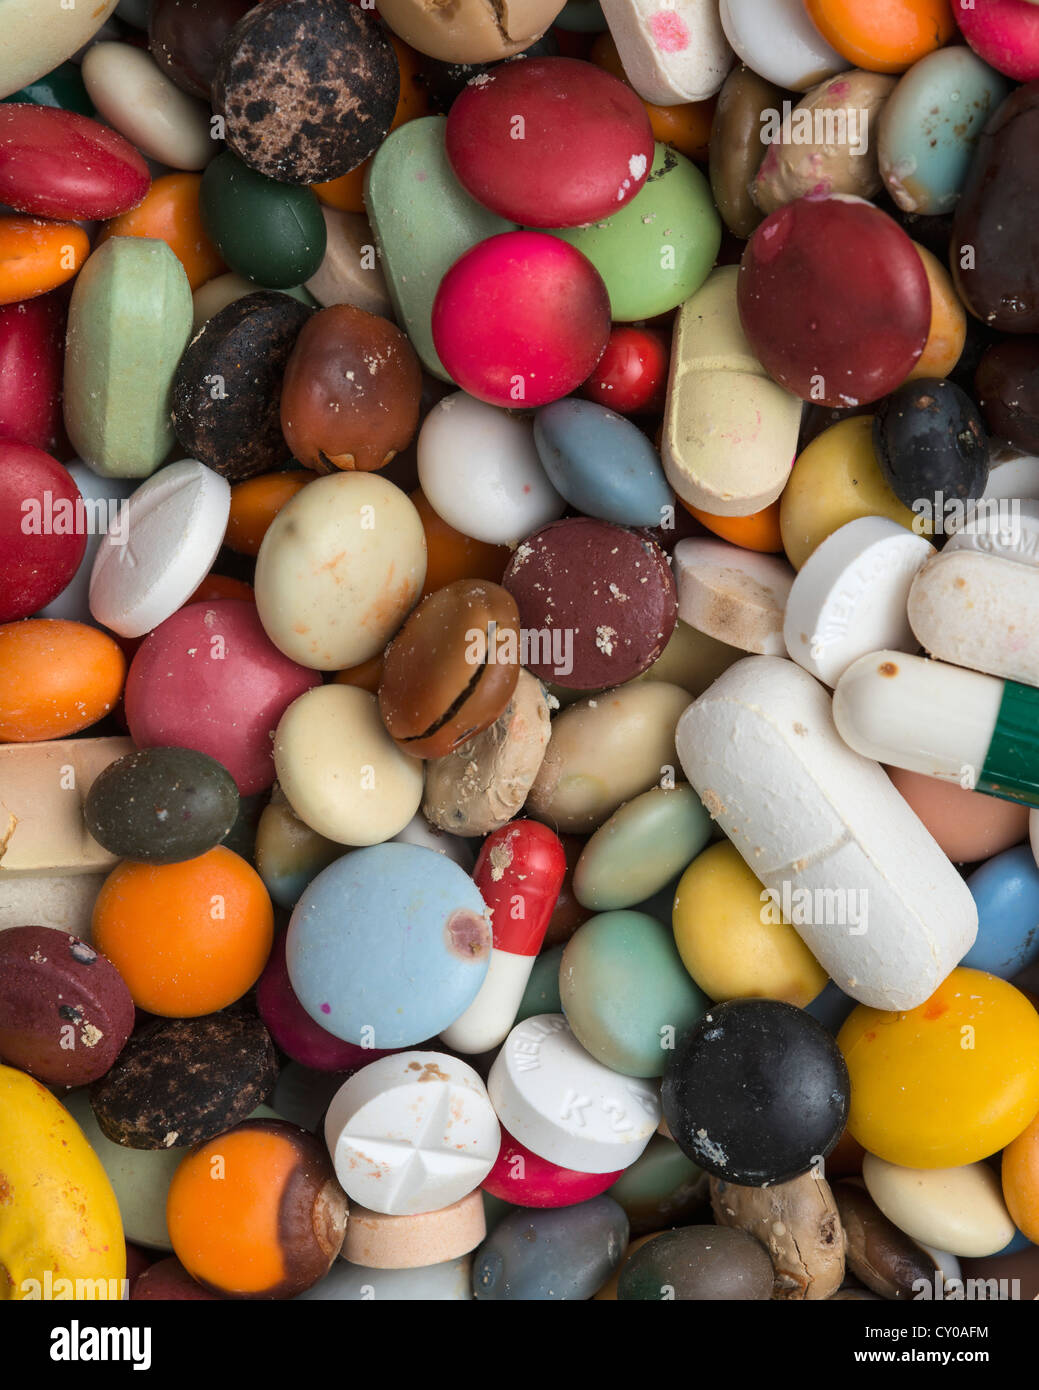 Expired medications, drugs, colourful mixture of pills, capsules and tablets, full-frame Stock Photo